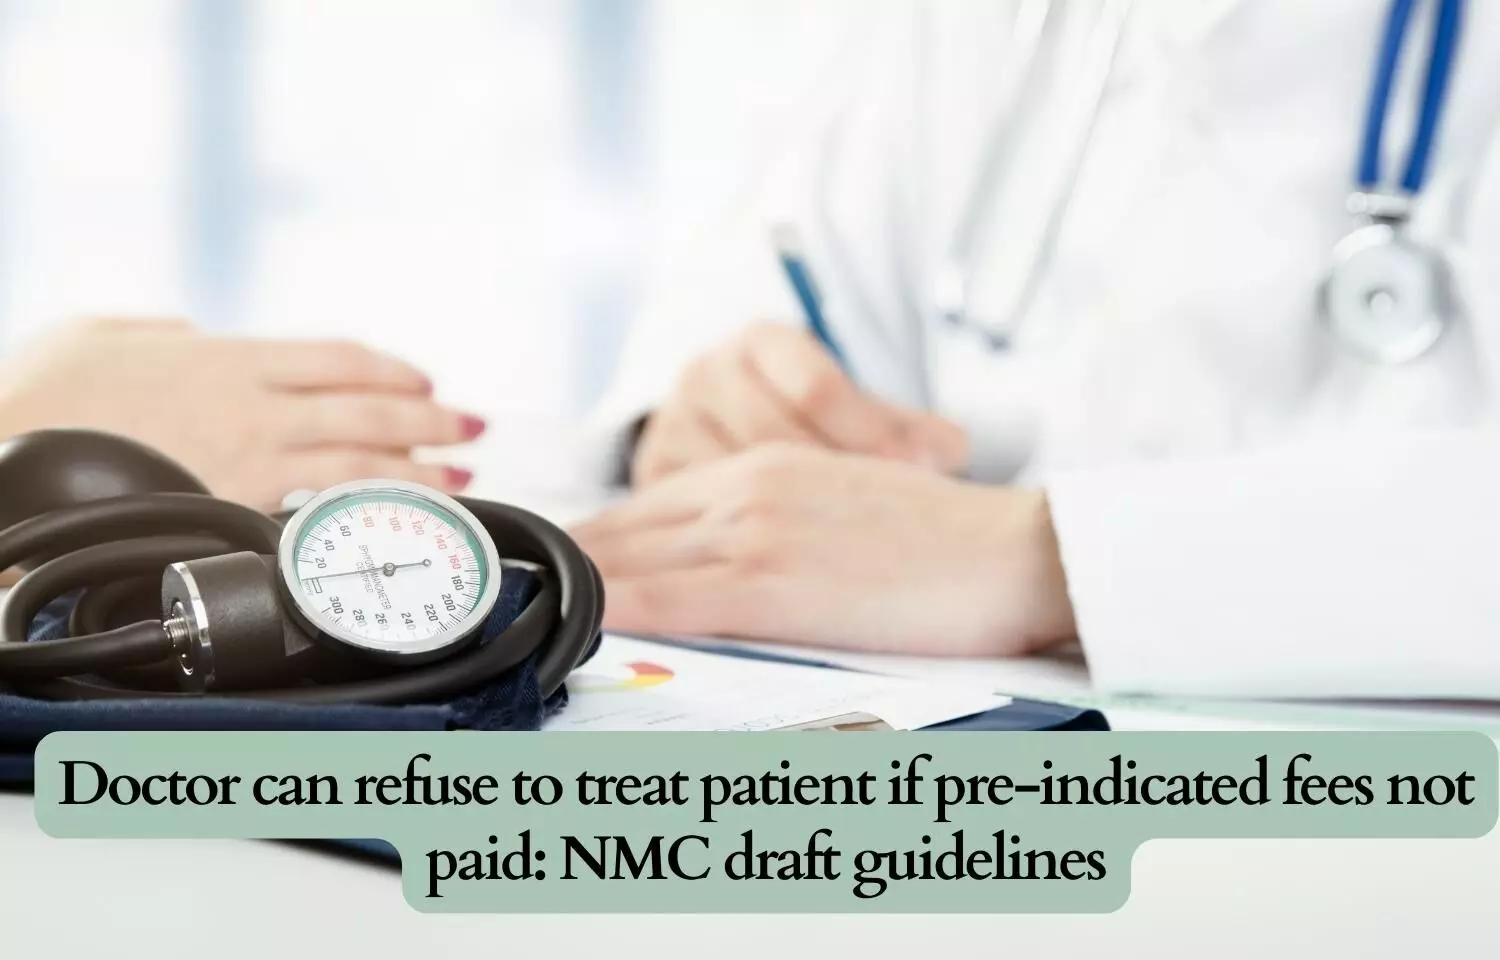 Doctor can refuse to treat patient if pre-indicated fees not paid: NMC draft guidelines